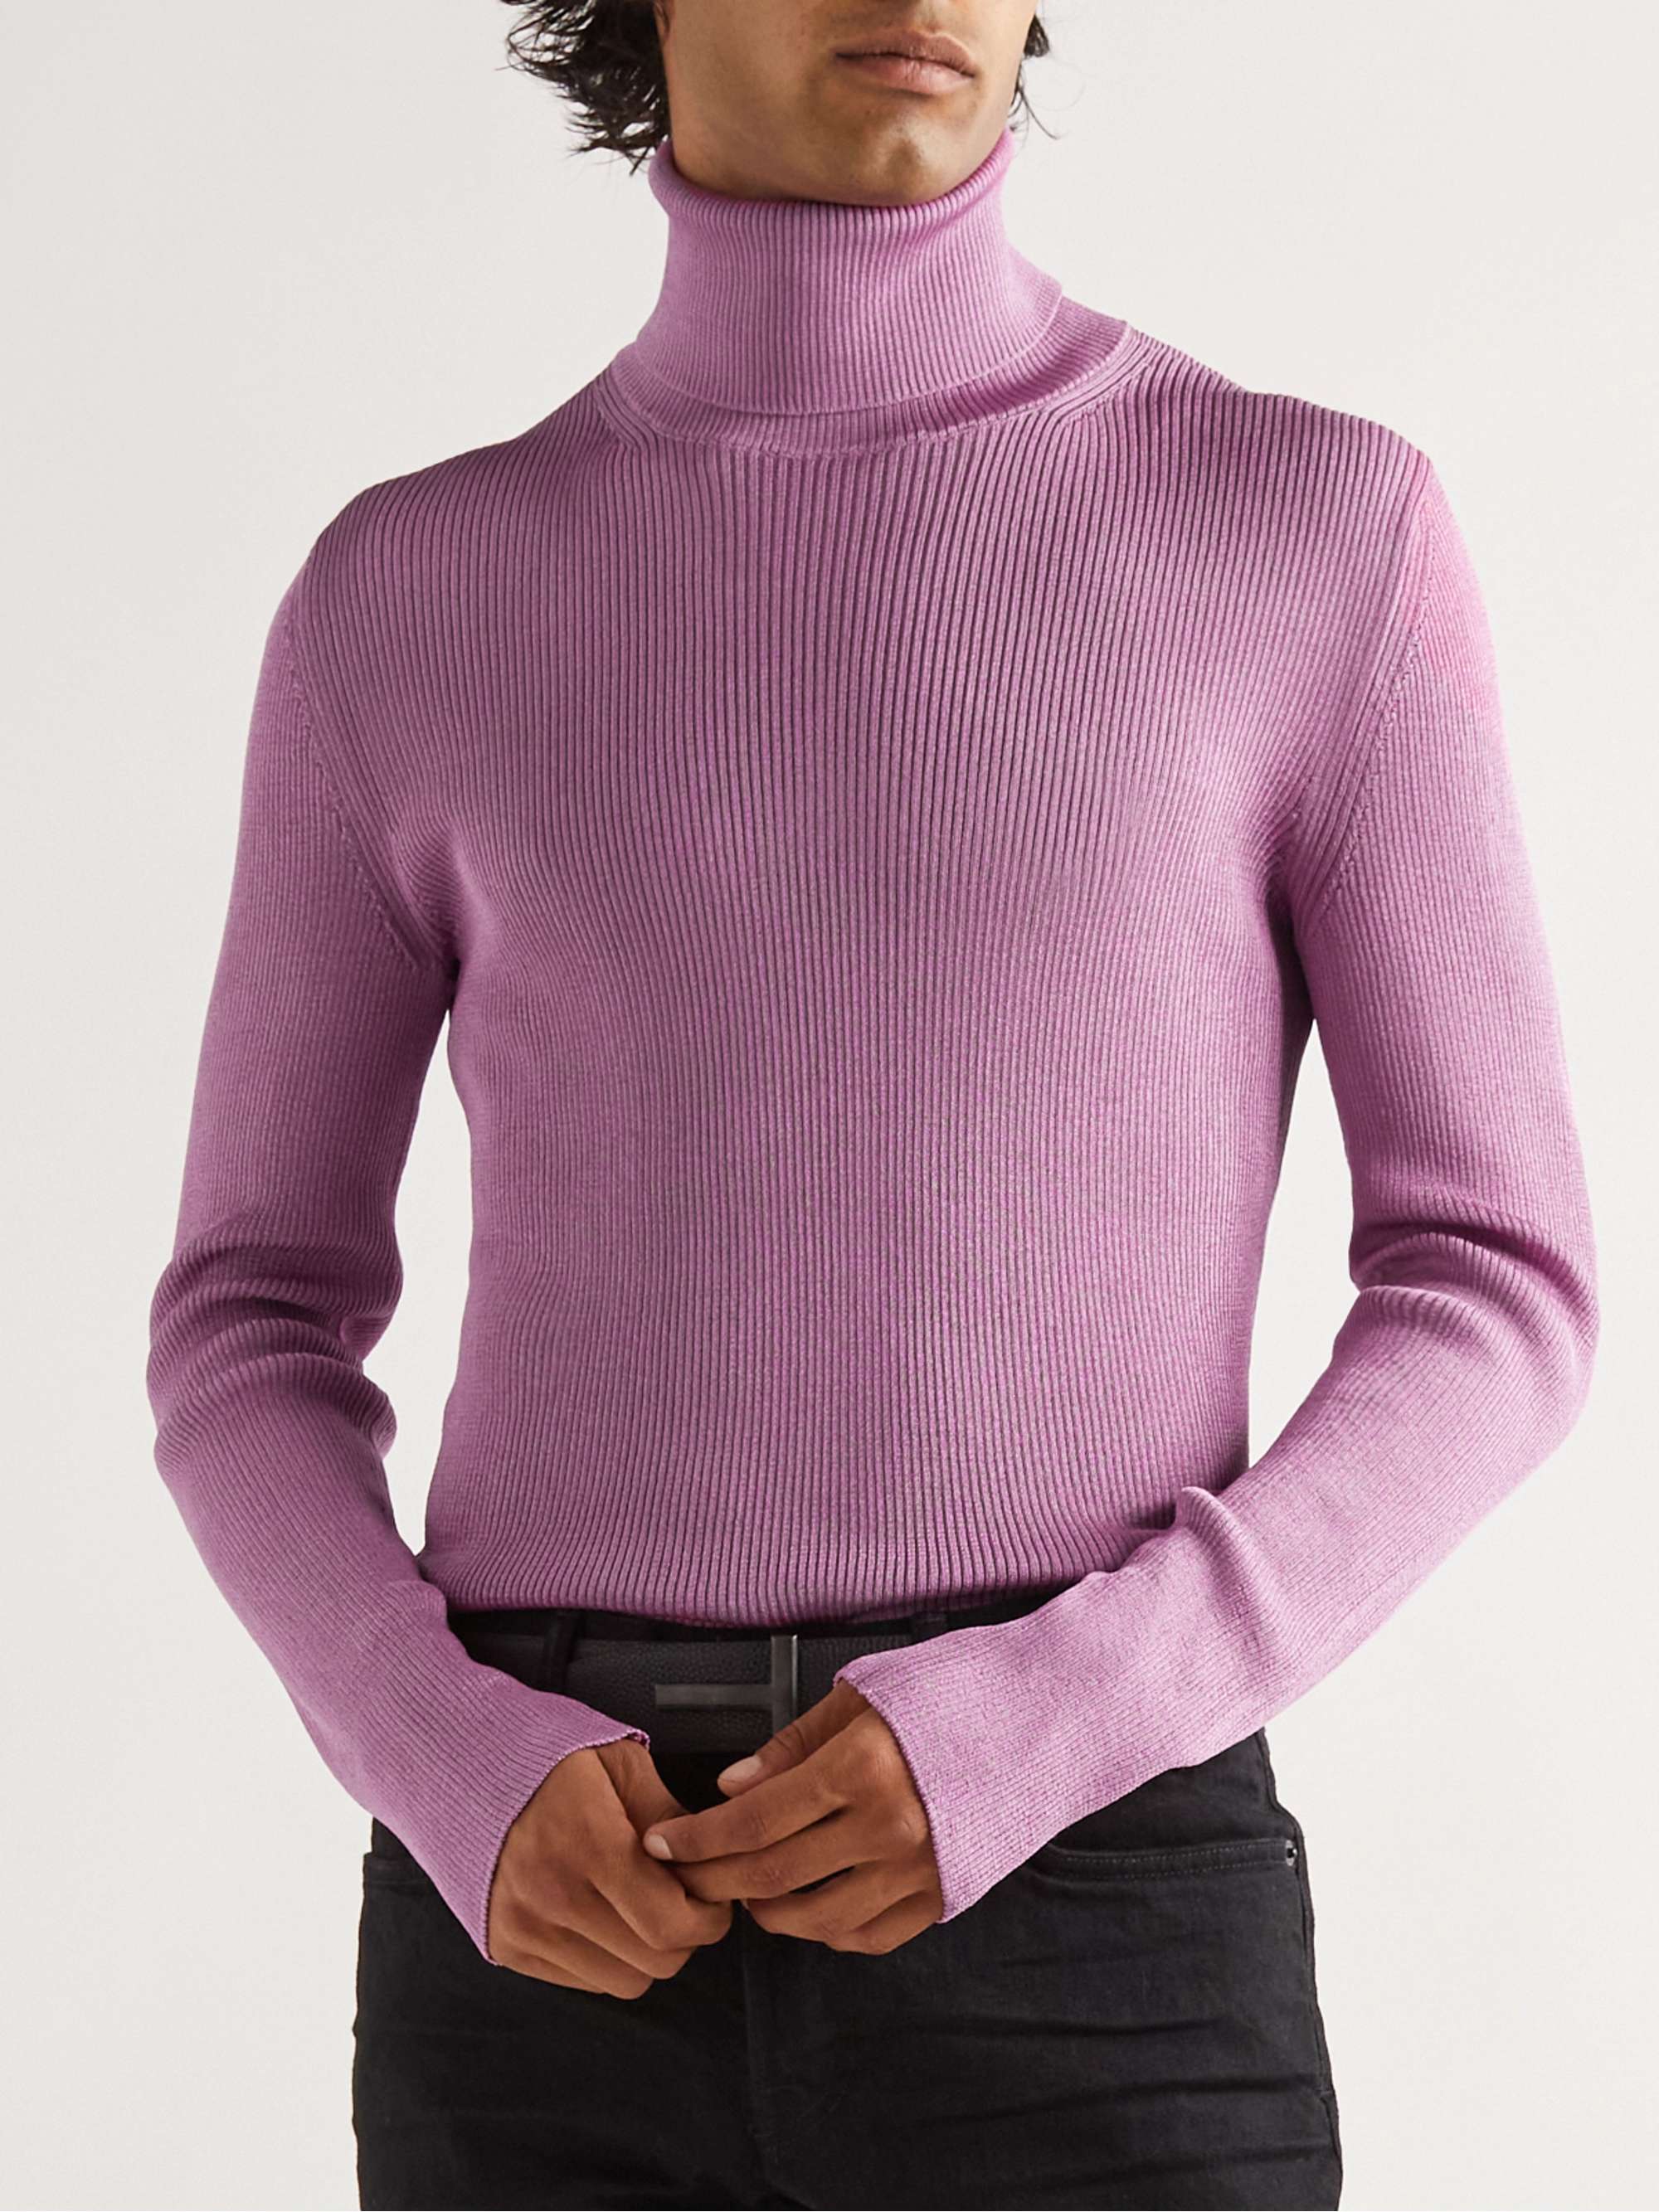 TOM FORD Ribbed Silk Sweater